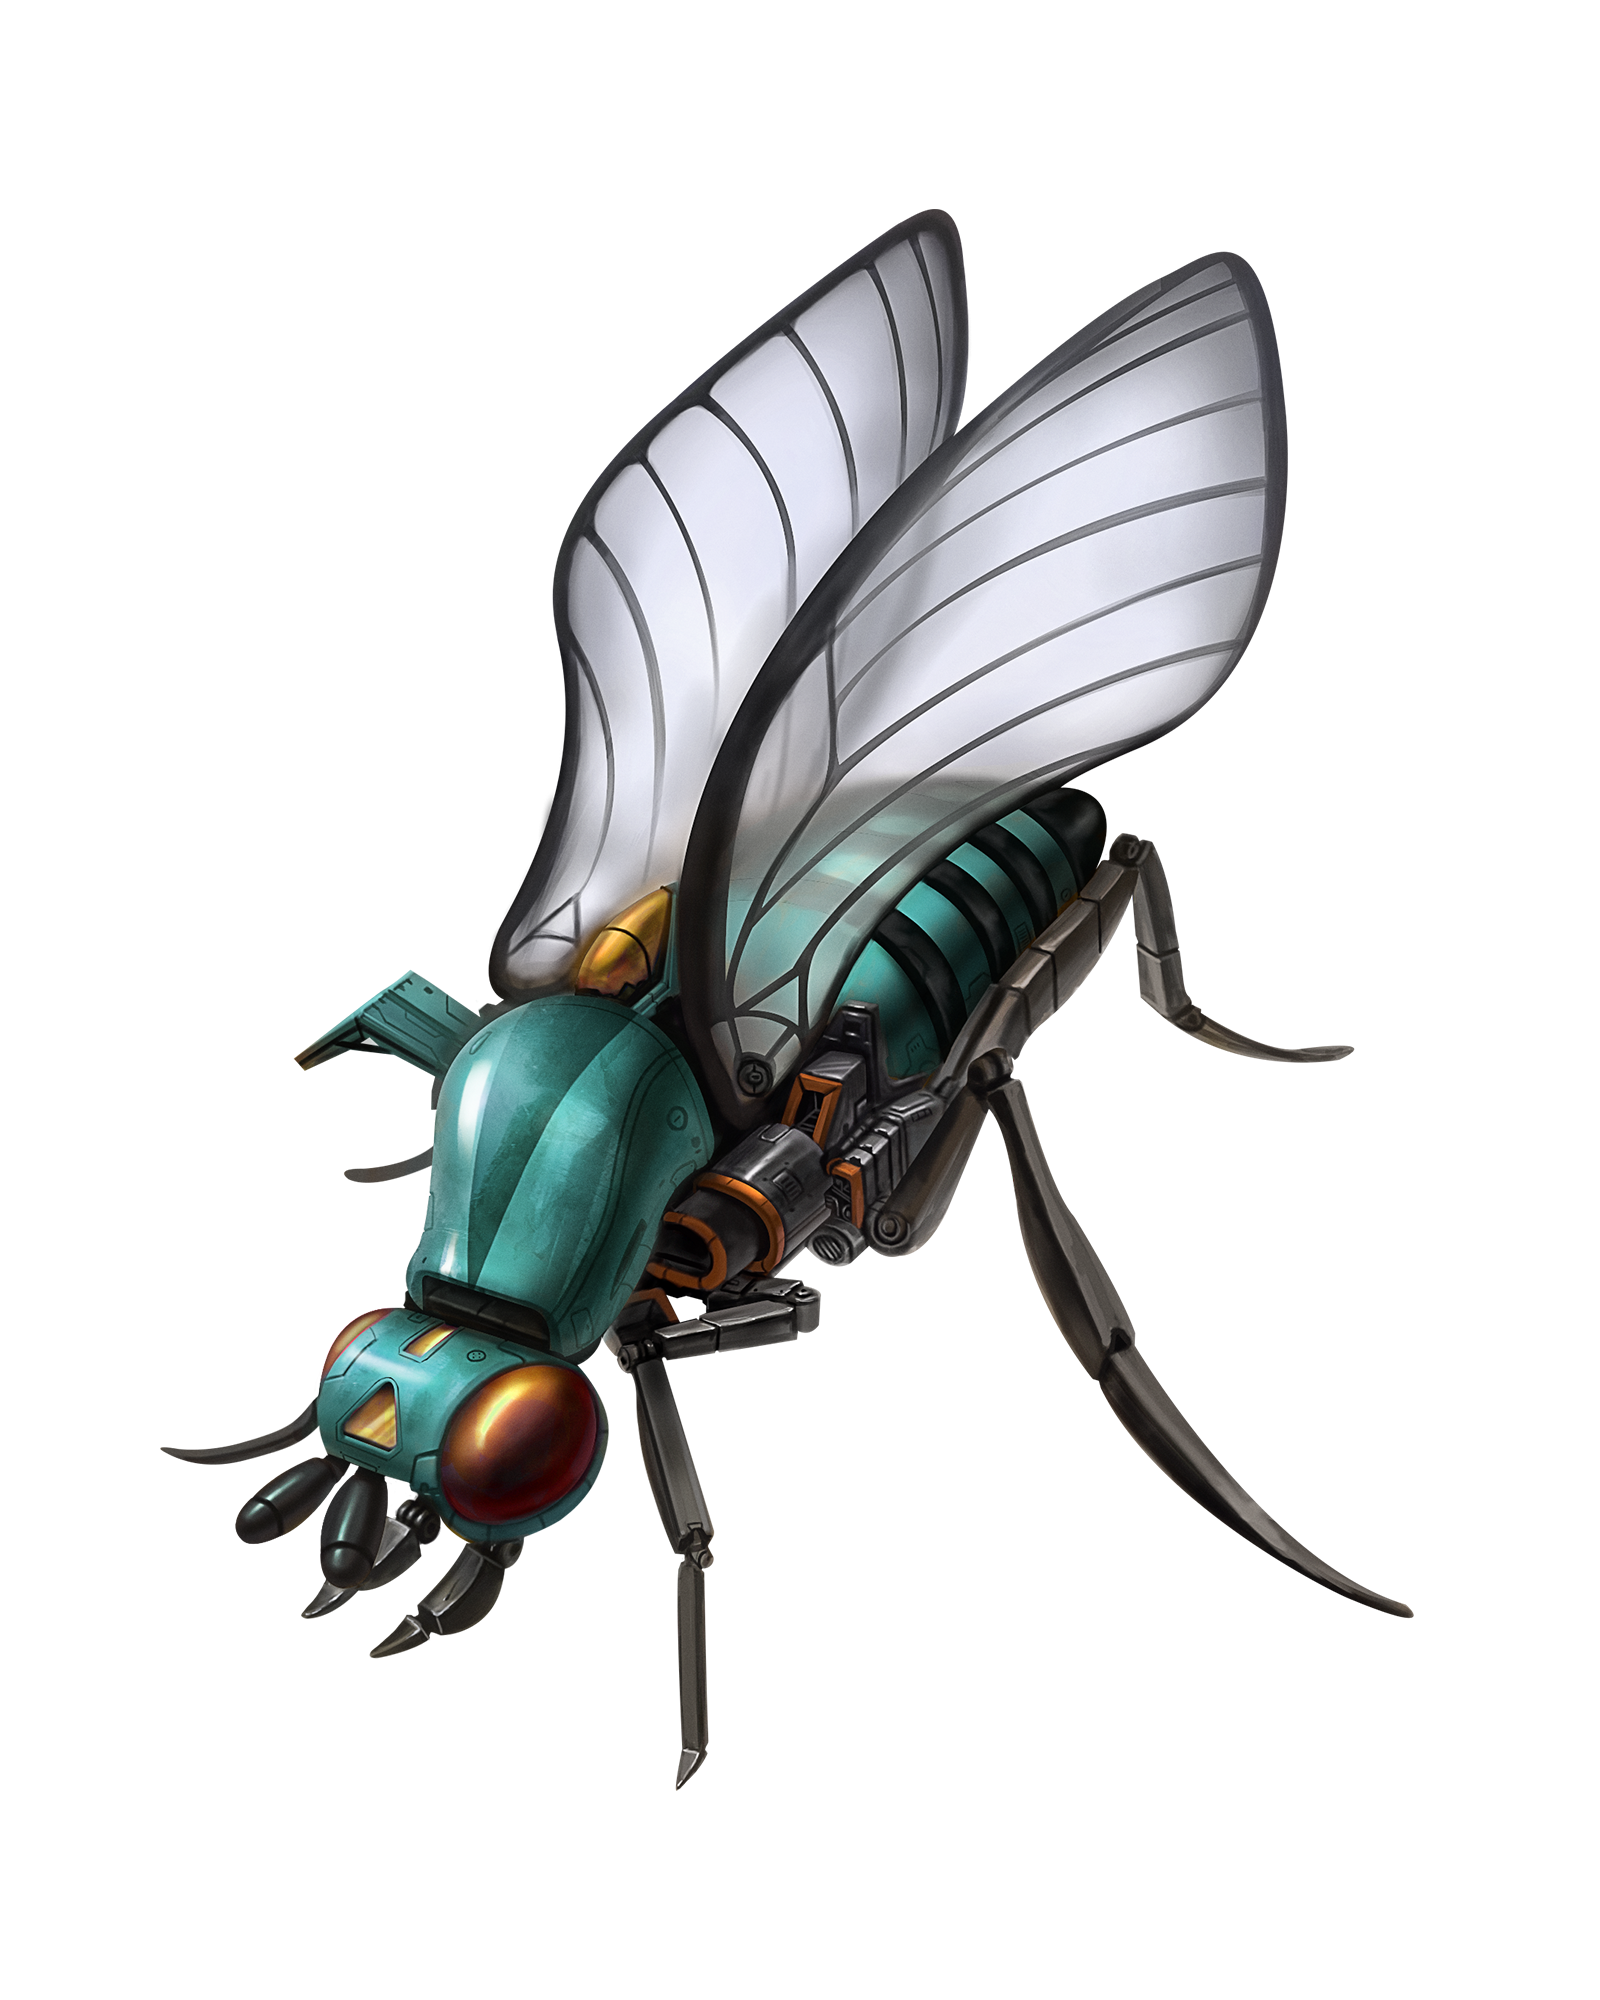 A starship designed to imitate a fly with a teal and silver body, and translucent white wings